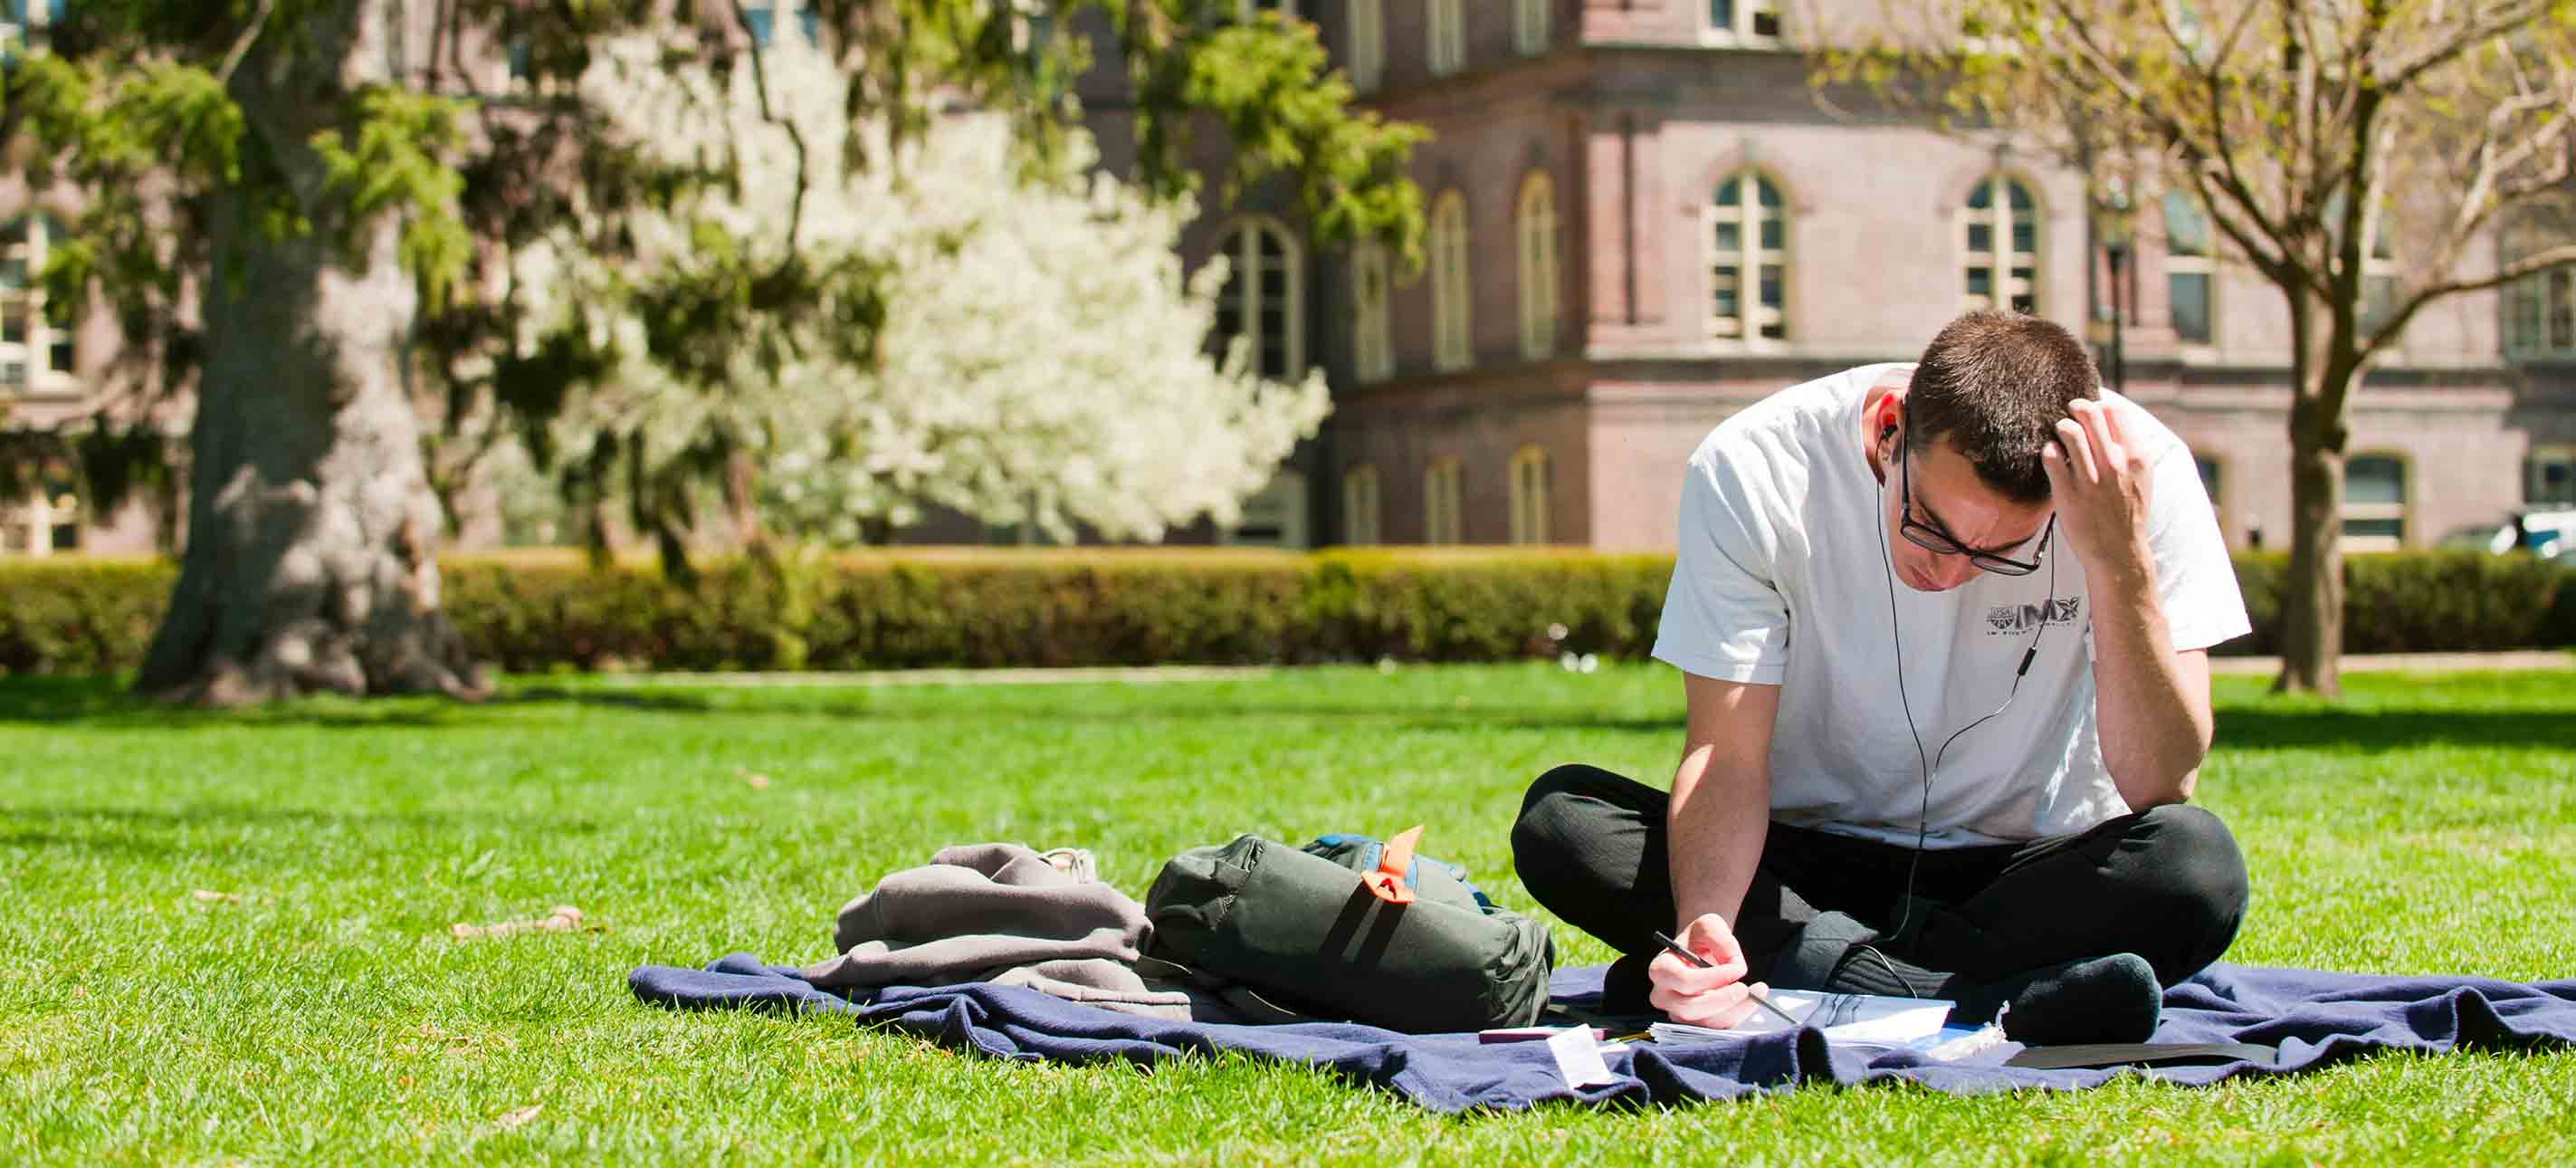 A student sits on a blanket in front of Main Building on a sunny day, looking down at some papers.